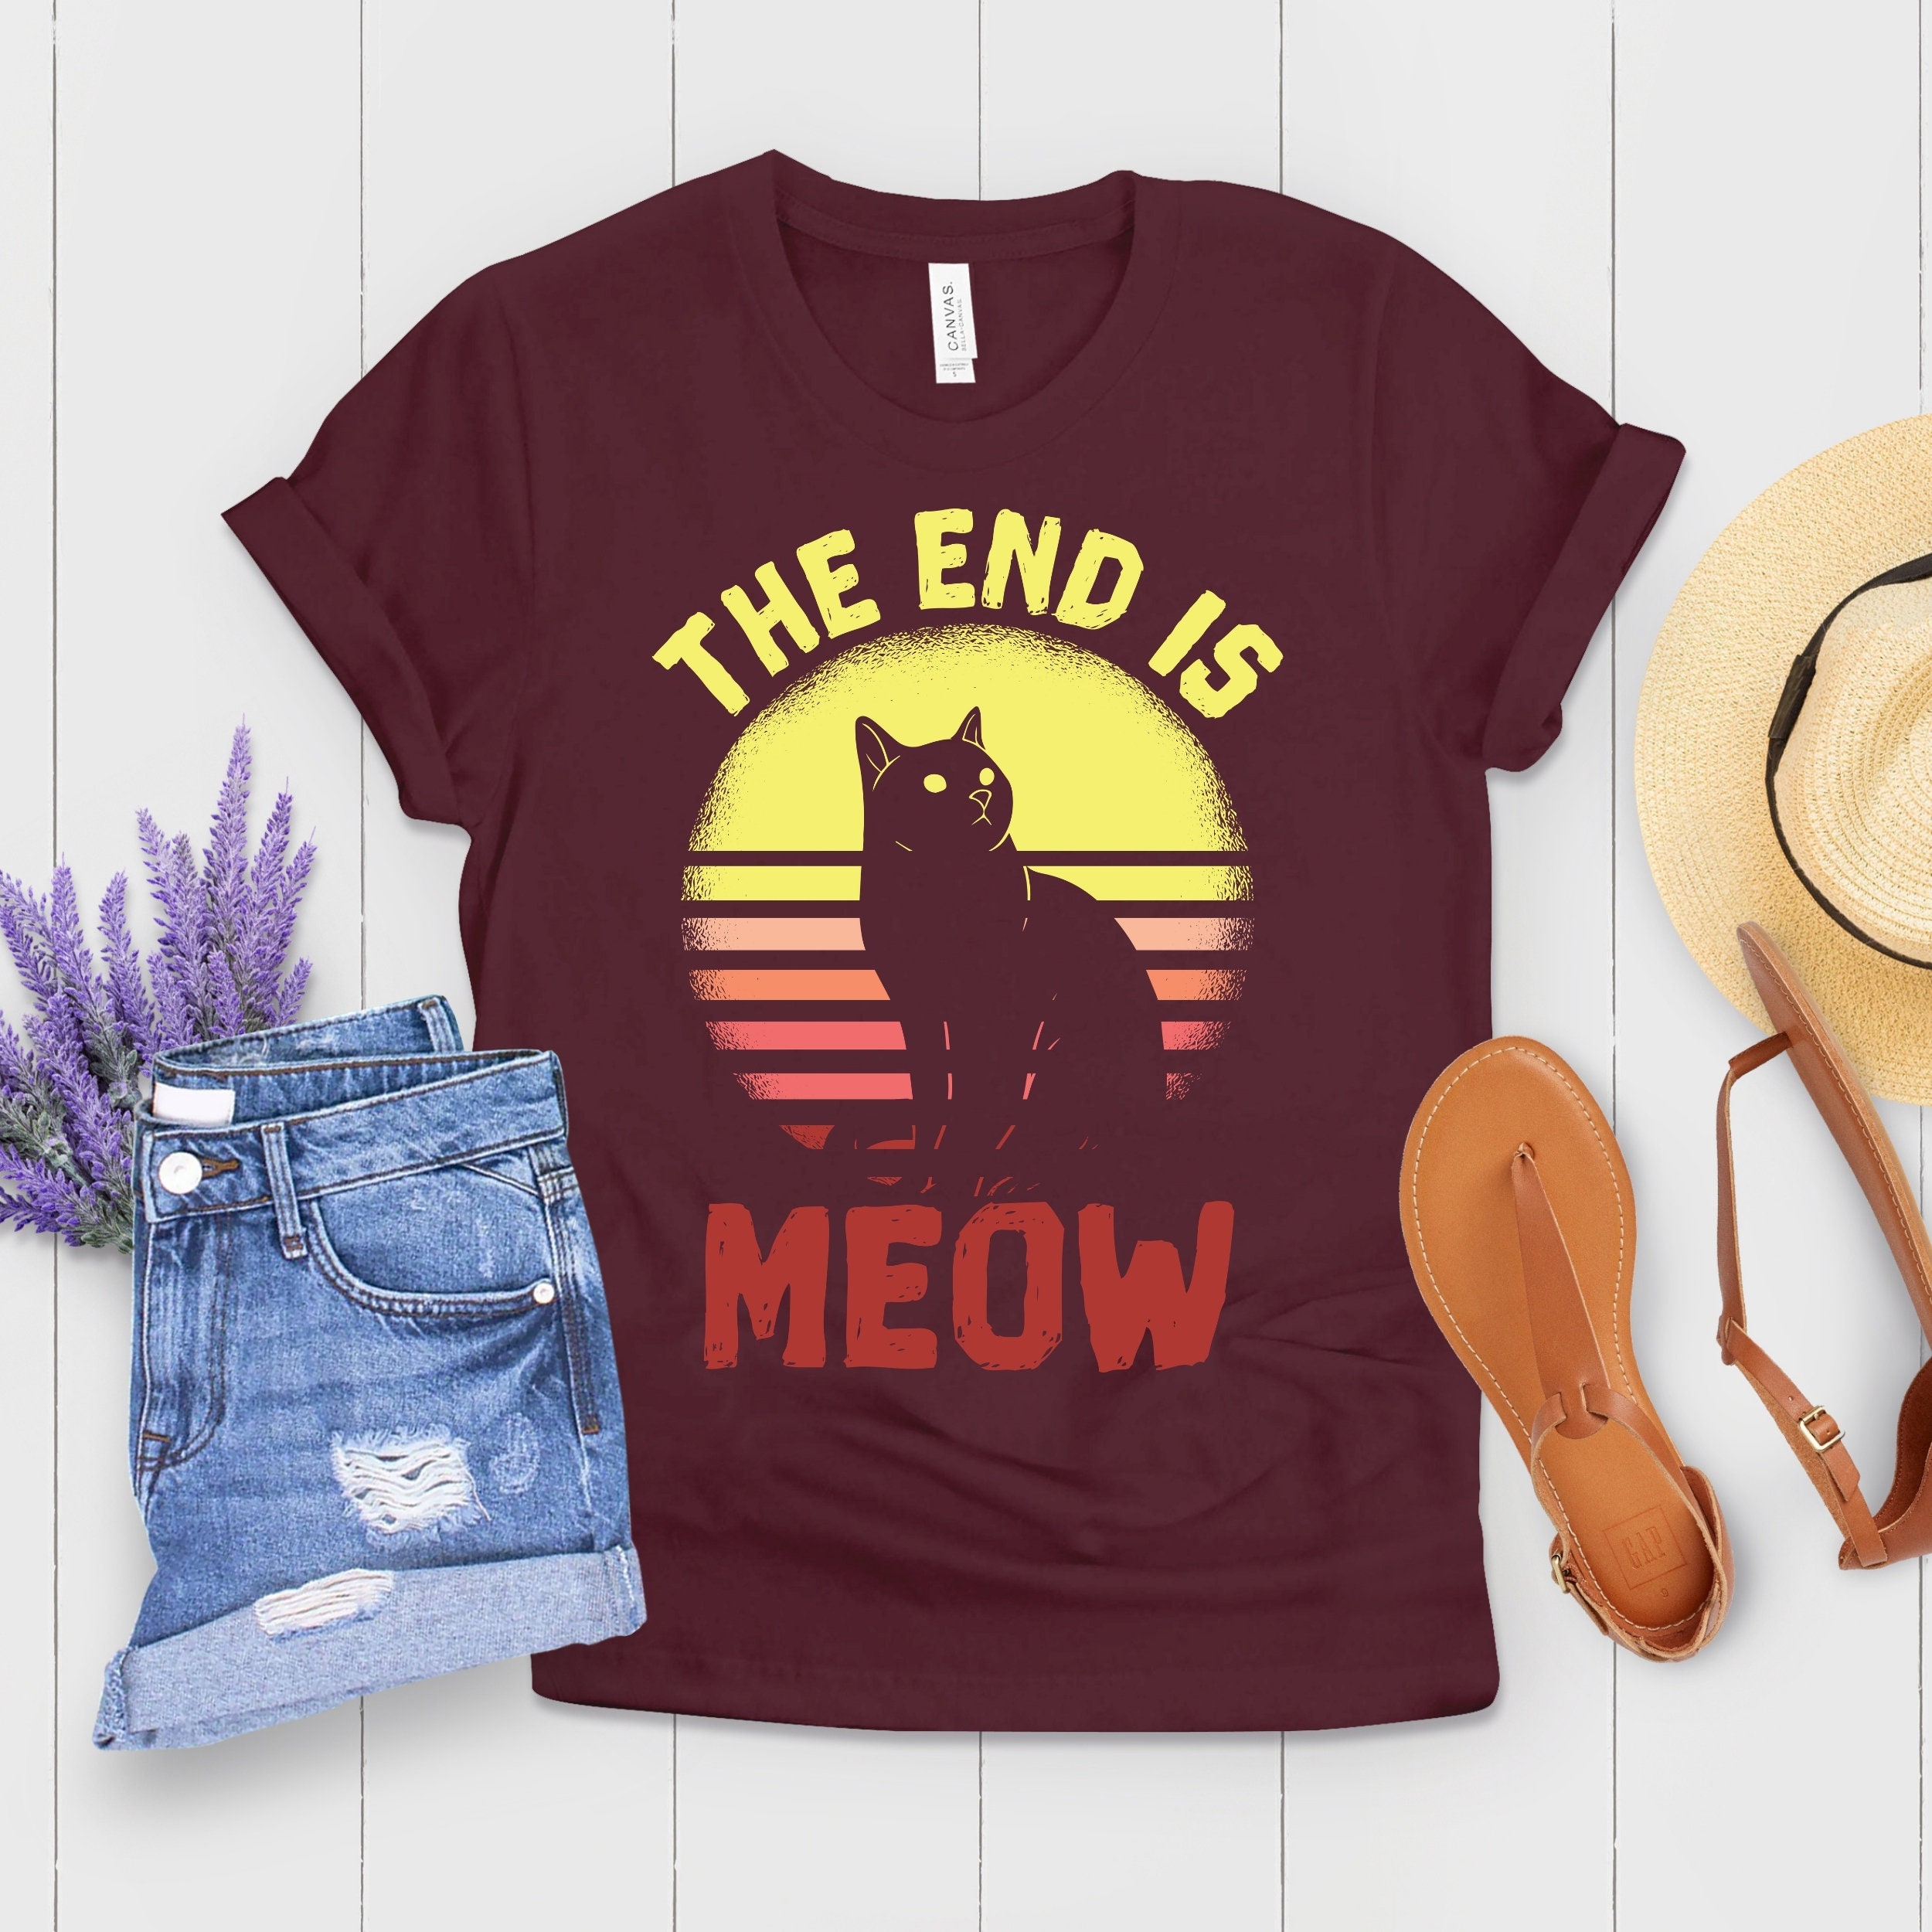 The End is Meow Tshirt Cat Lover Shirt Funny Cat Tshirt | Etsy